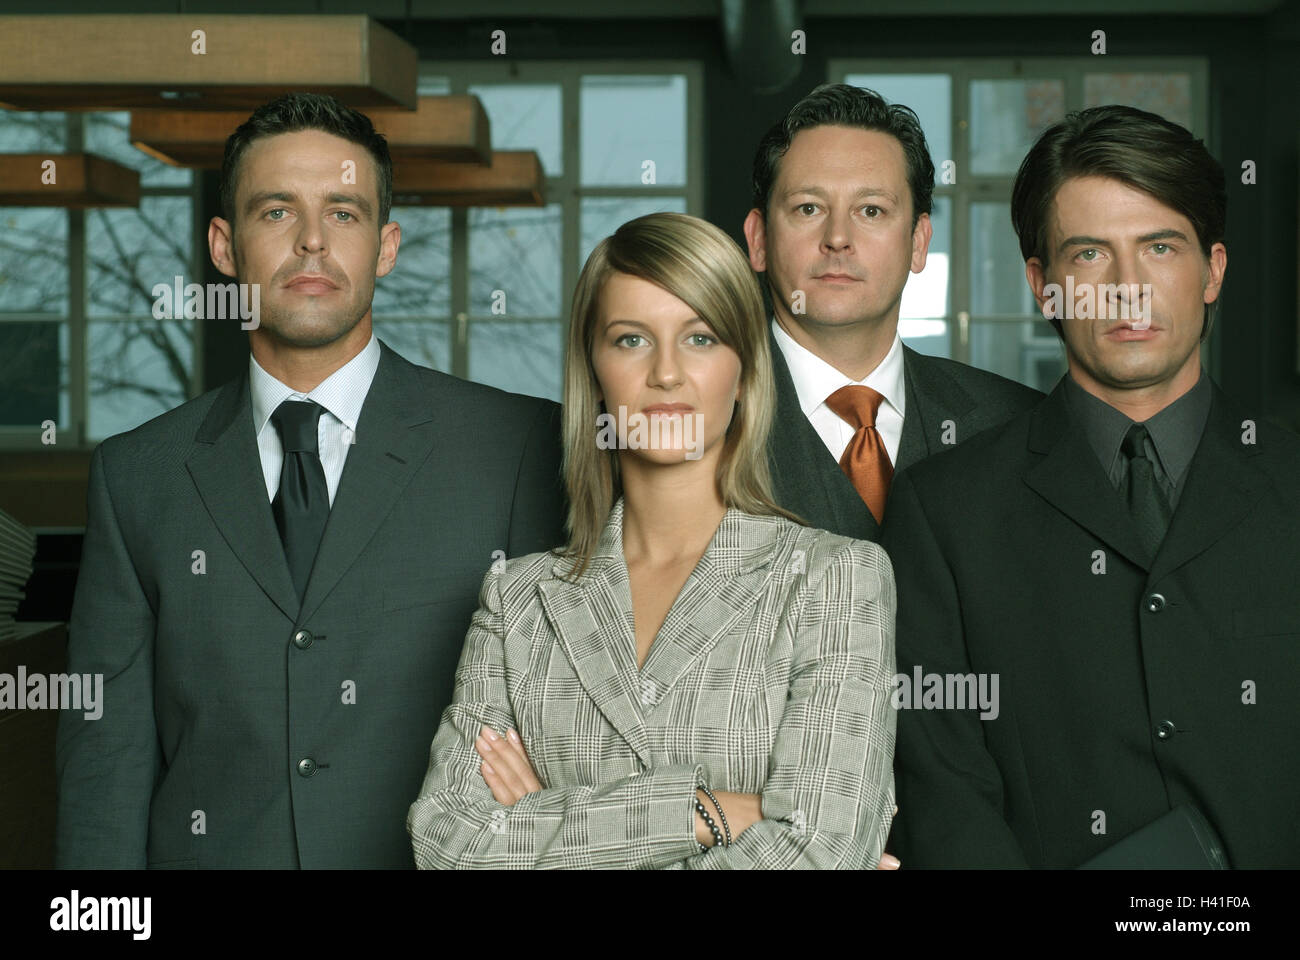 Business people, seriously, group picture business, men, business people, businesswoman, woman, colleague, colleague, team, self-confidently, confidently, confidently, ambitiously, wait, stand, unity, group, view camera, inside Stock Photo